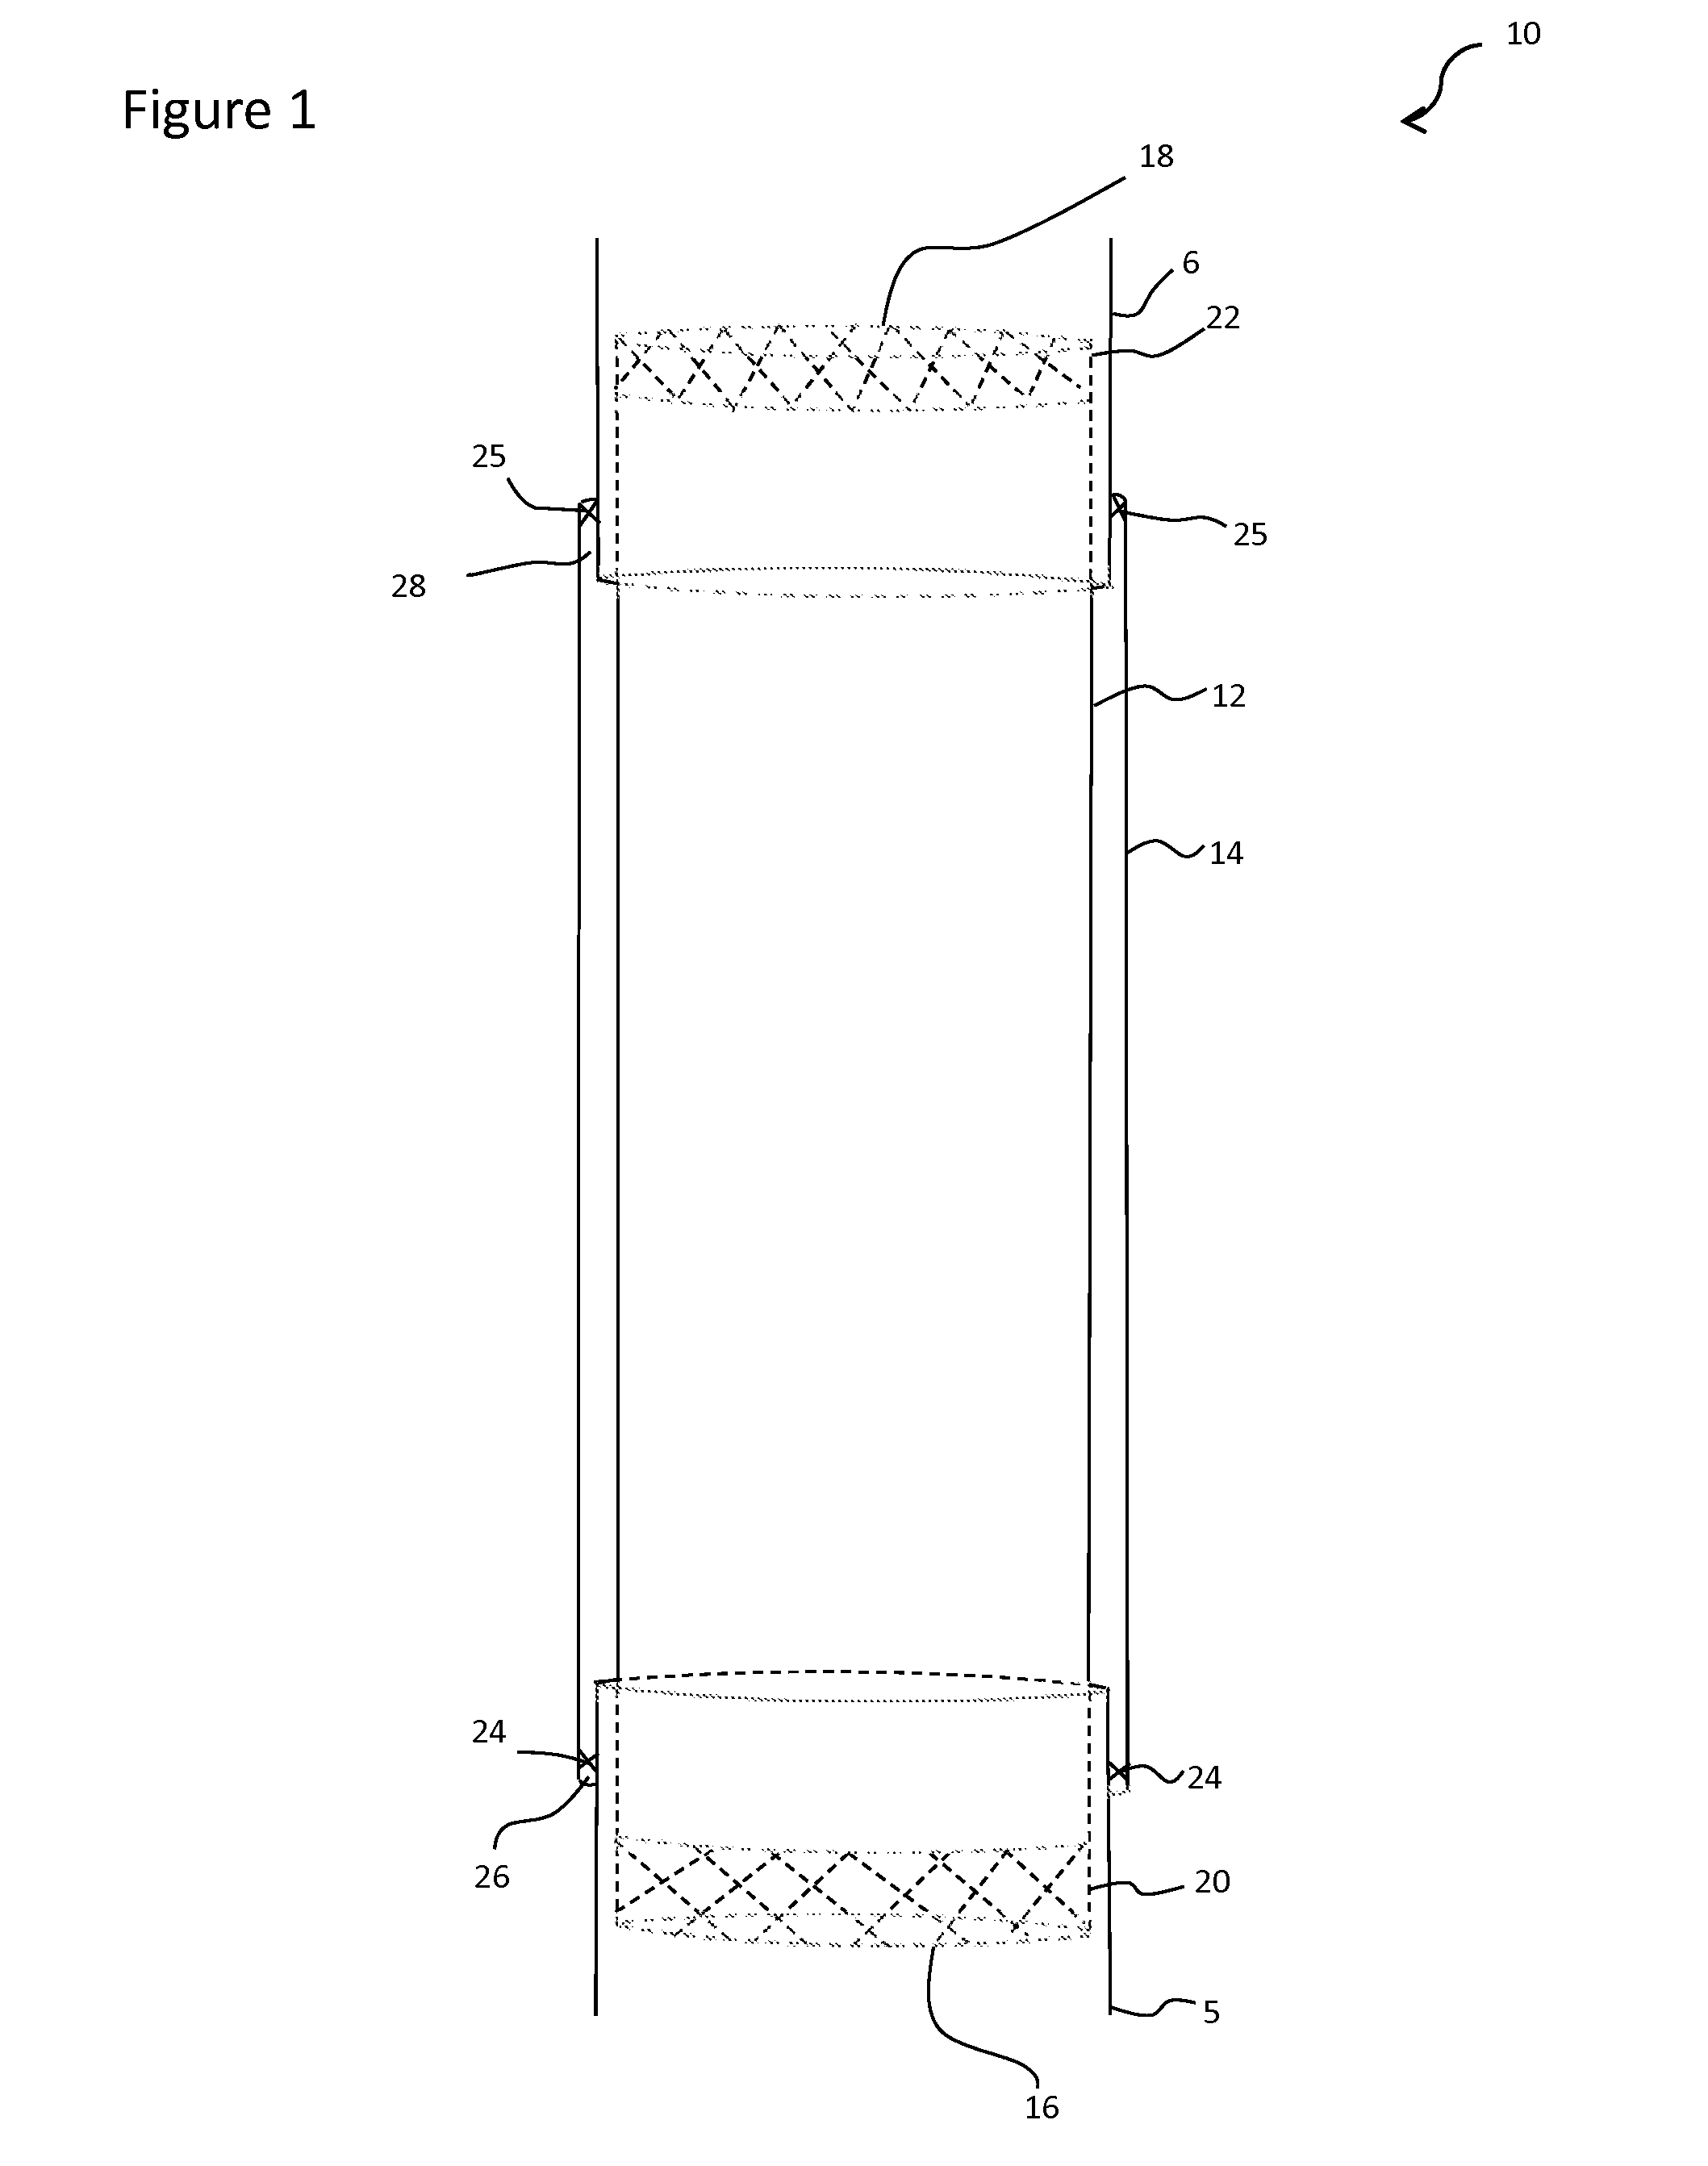 Methods and materials for replacing a circumferential segment of an esophagus